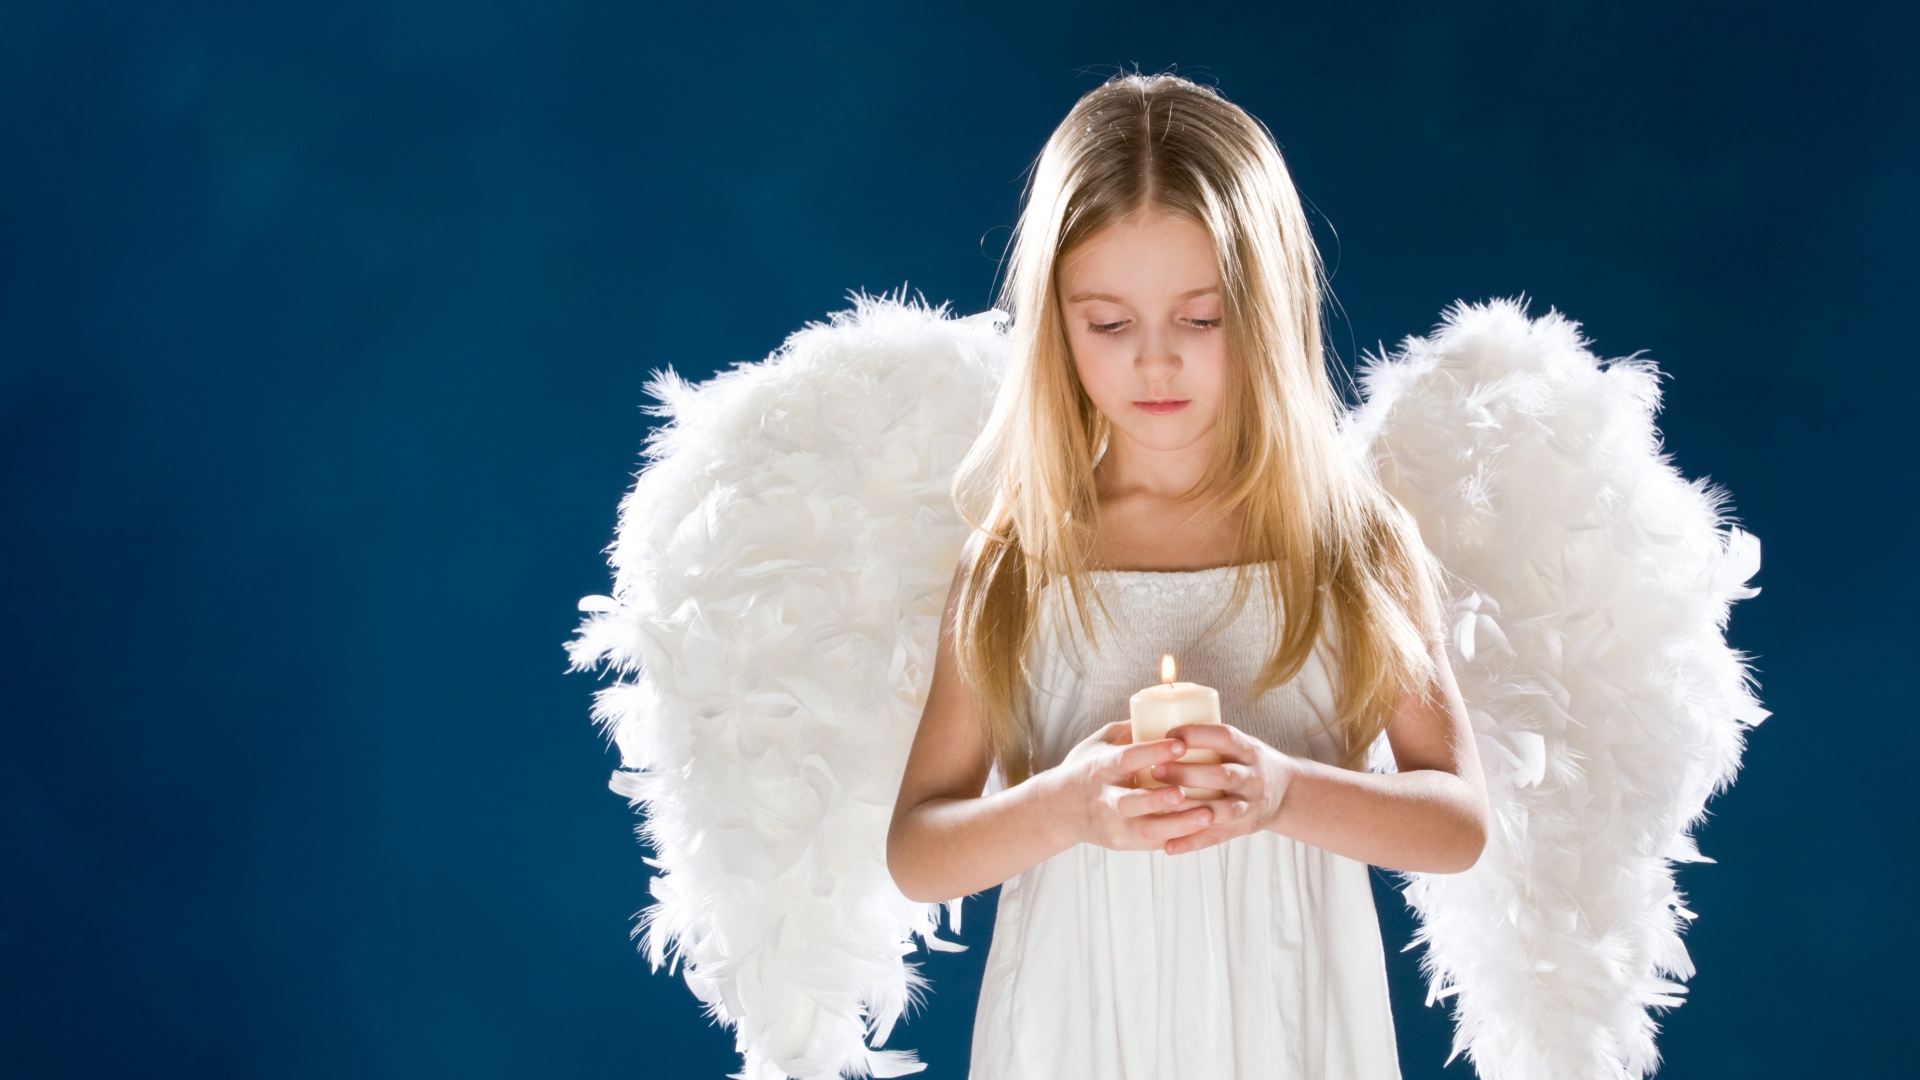 Download Wallpaper 1920x1080 child, girl, angel, wings, candle Full ...